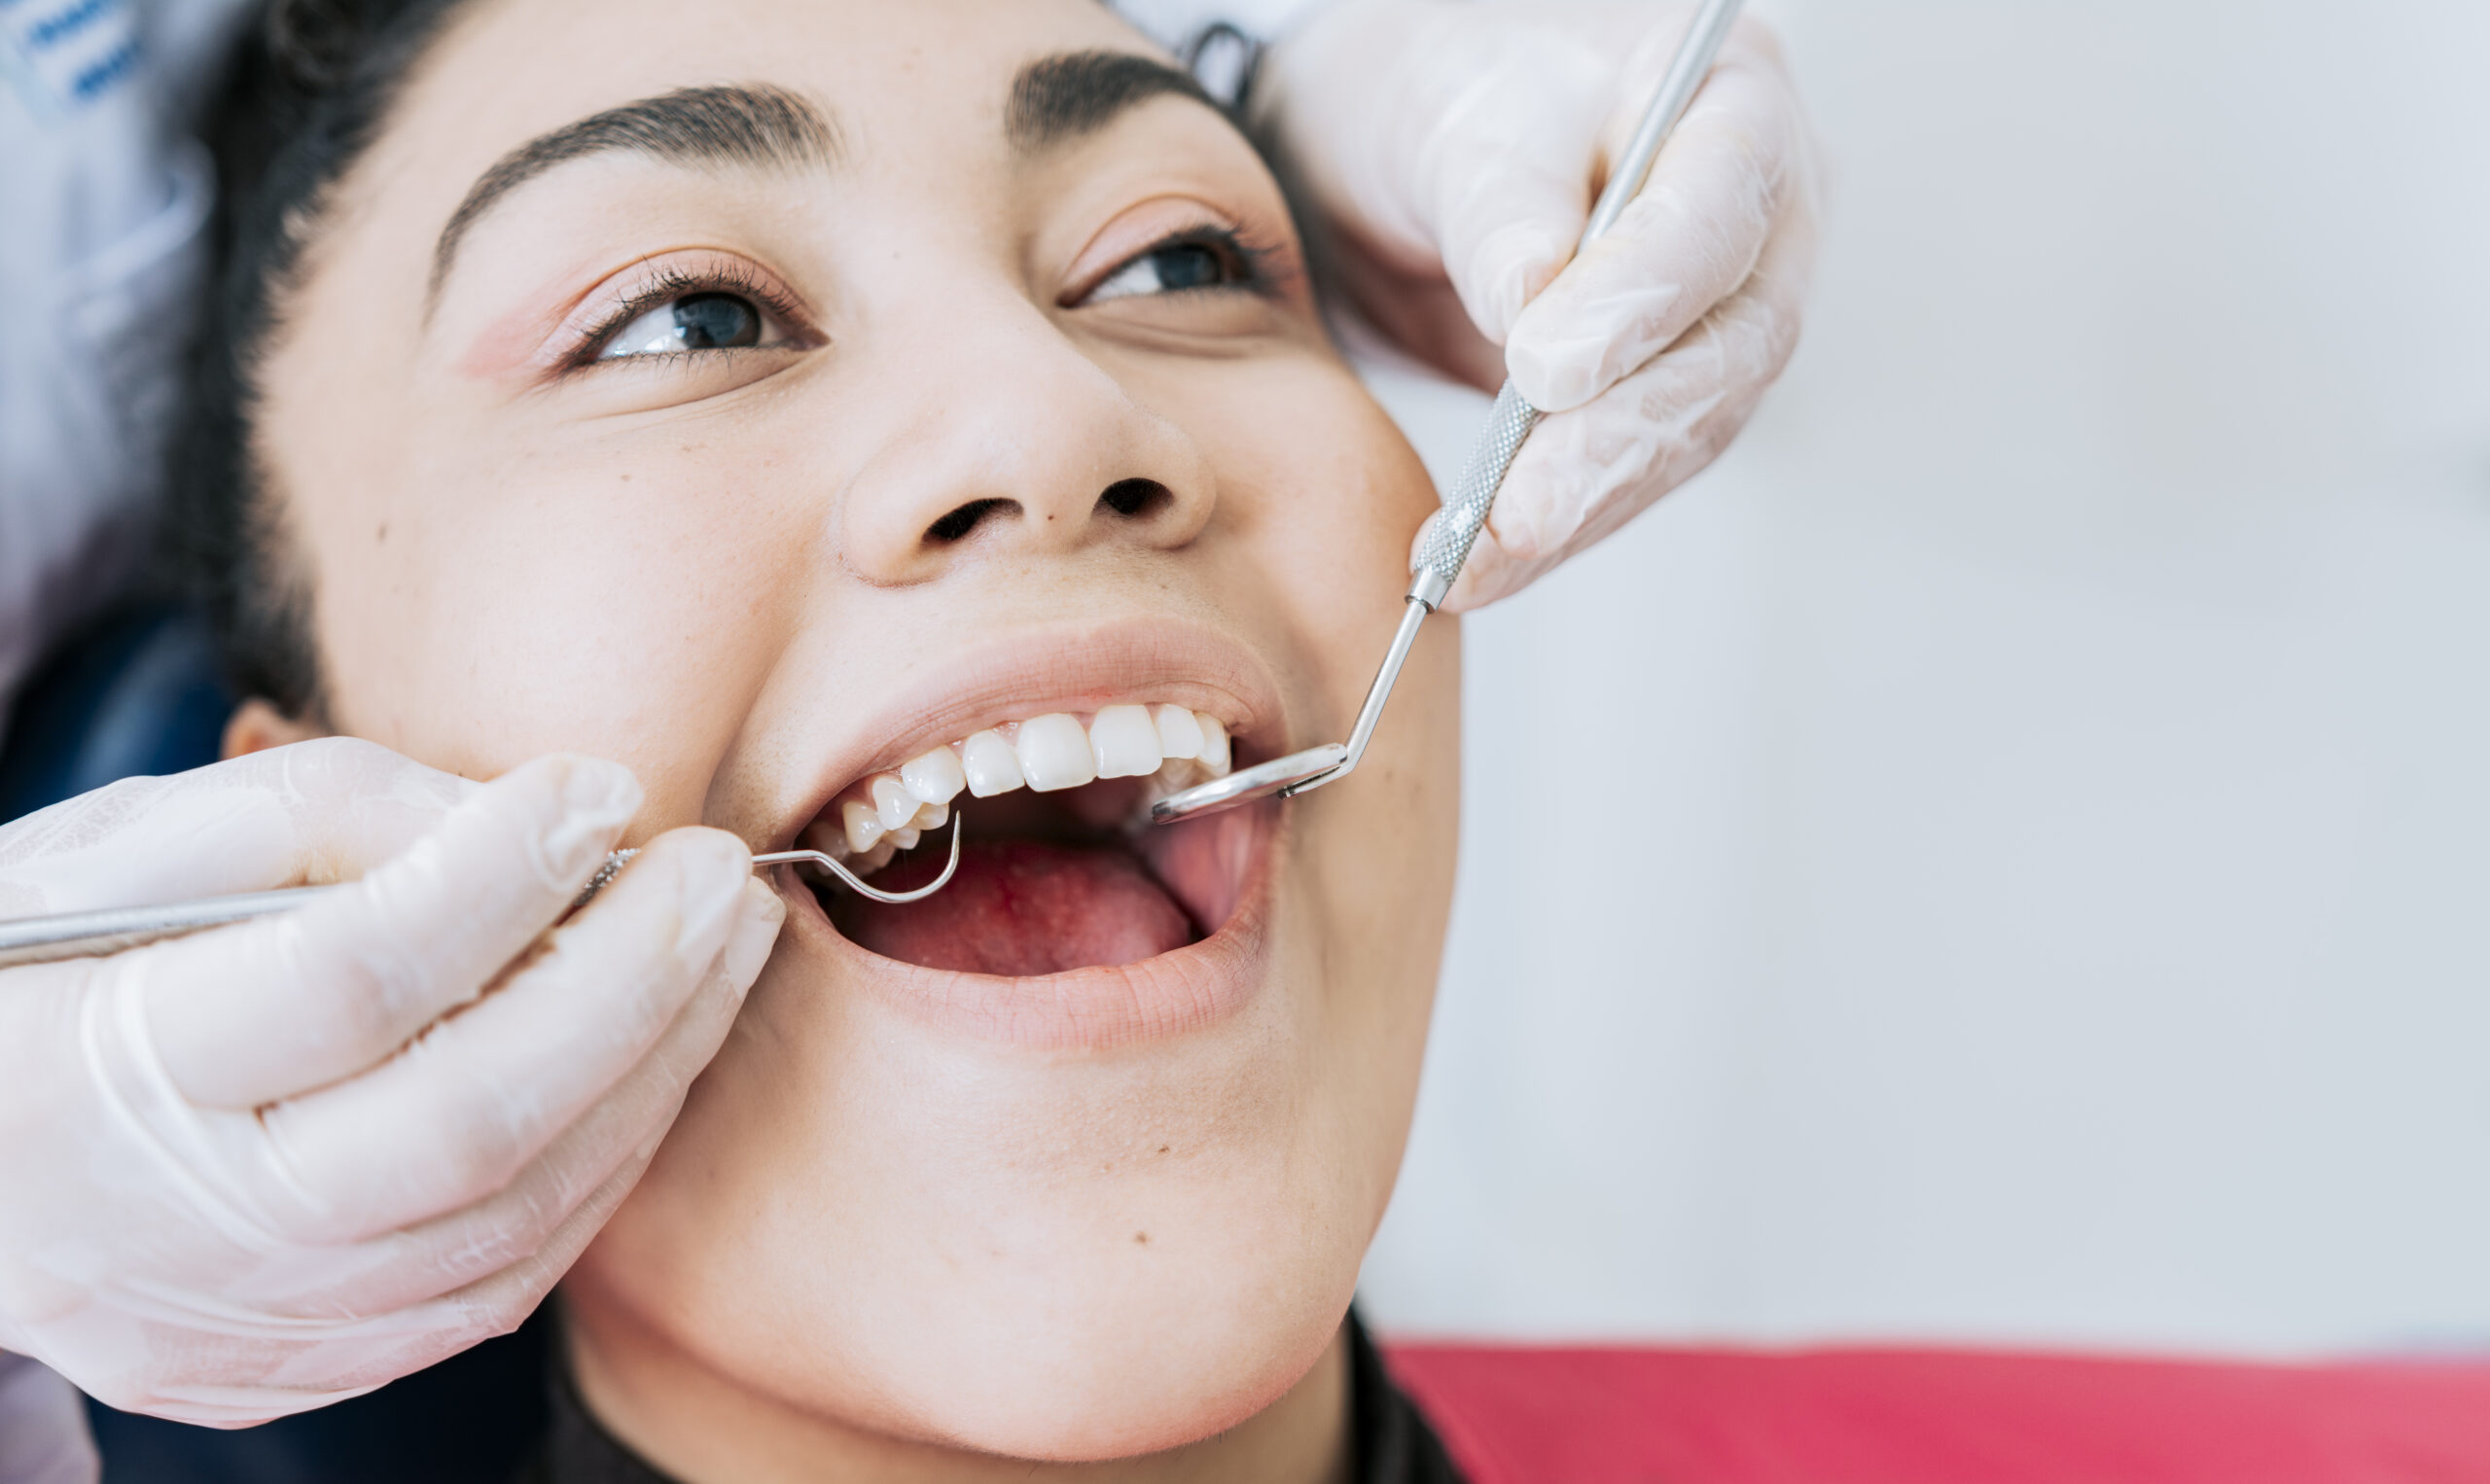 Young woman with her mouth open wide getting a teeth cleaning from a professional whose gloved hands holding dental probes are on either side of the patient's mouth